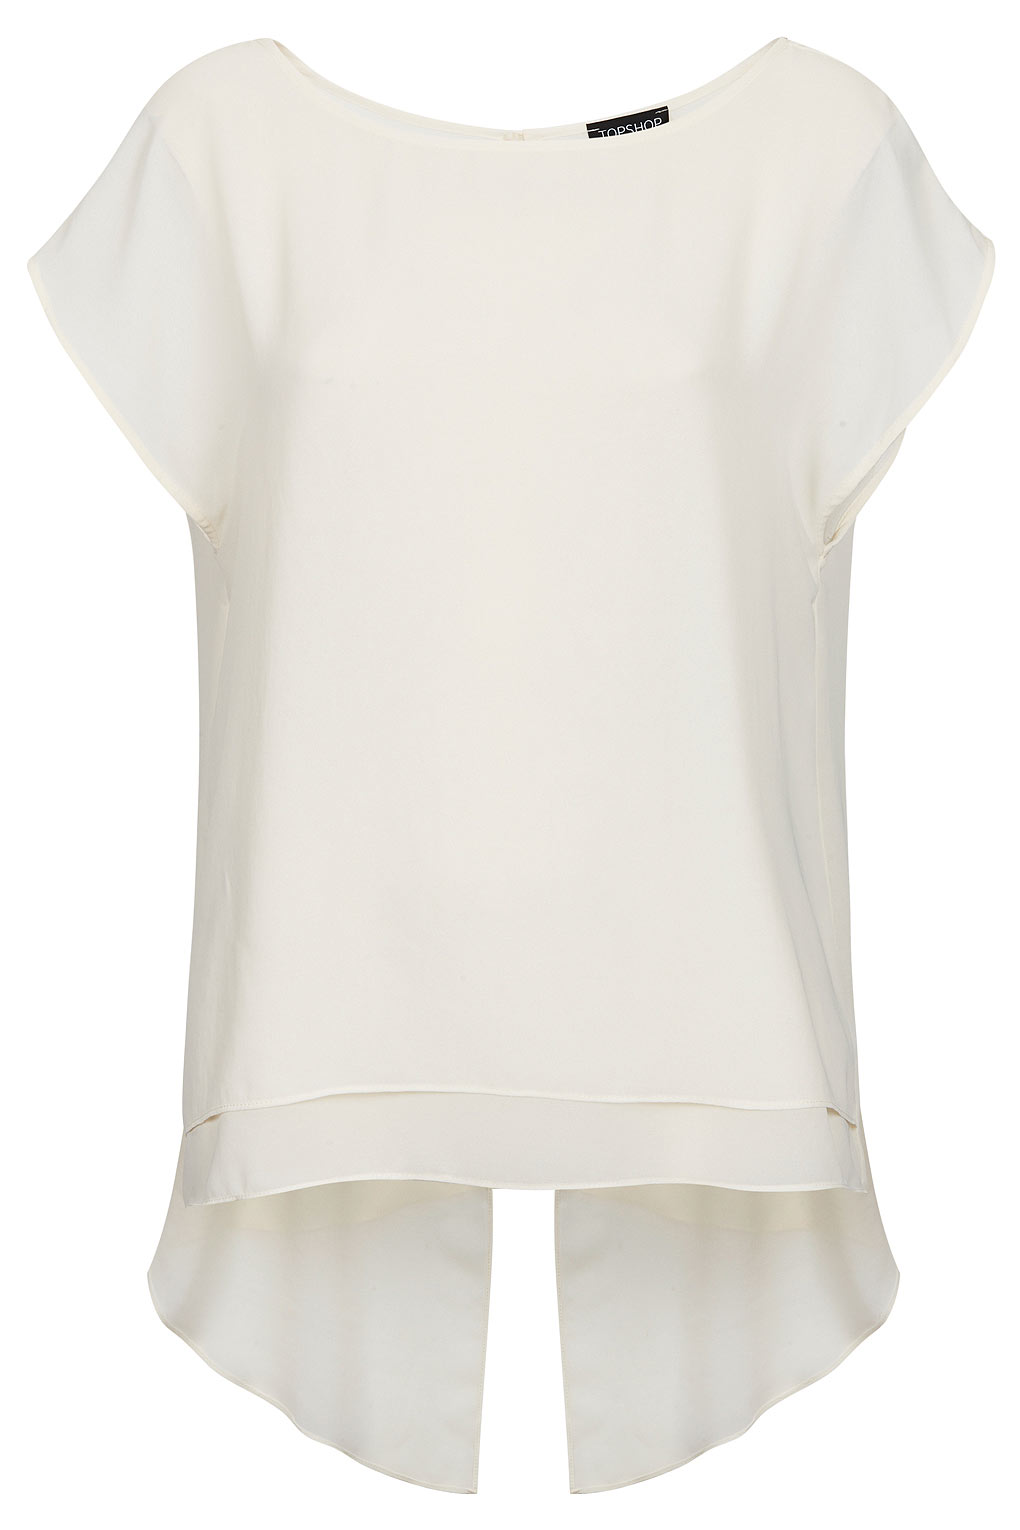 TOPSHOP Open Back Fishtail Blouse in Cream (White) - Lyst